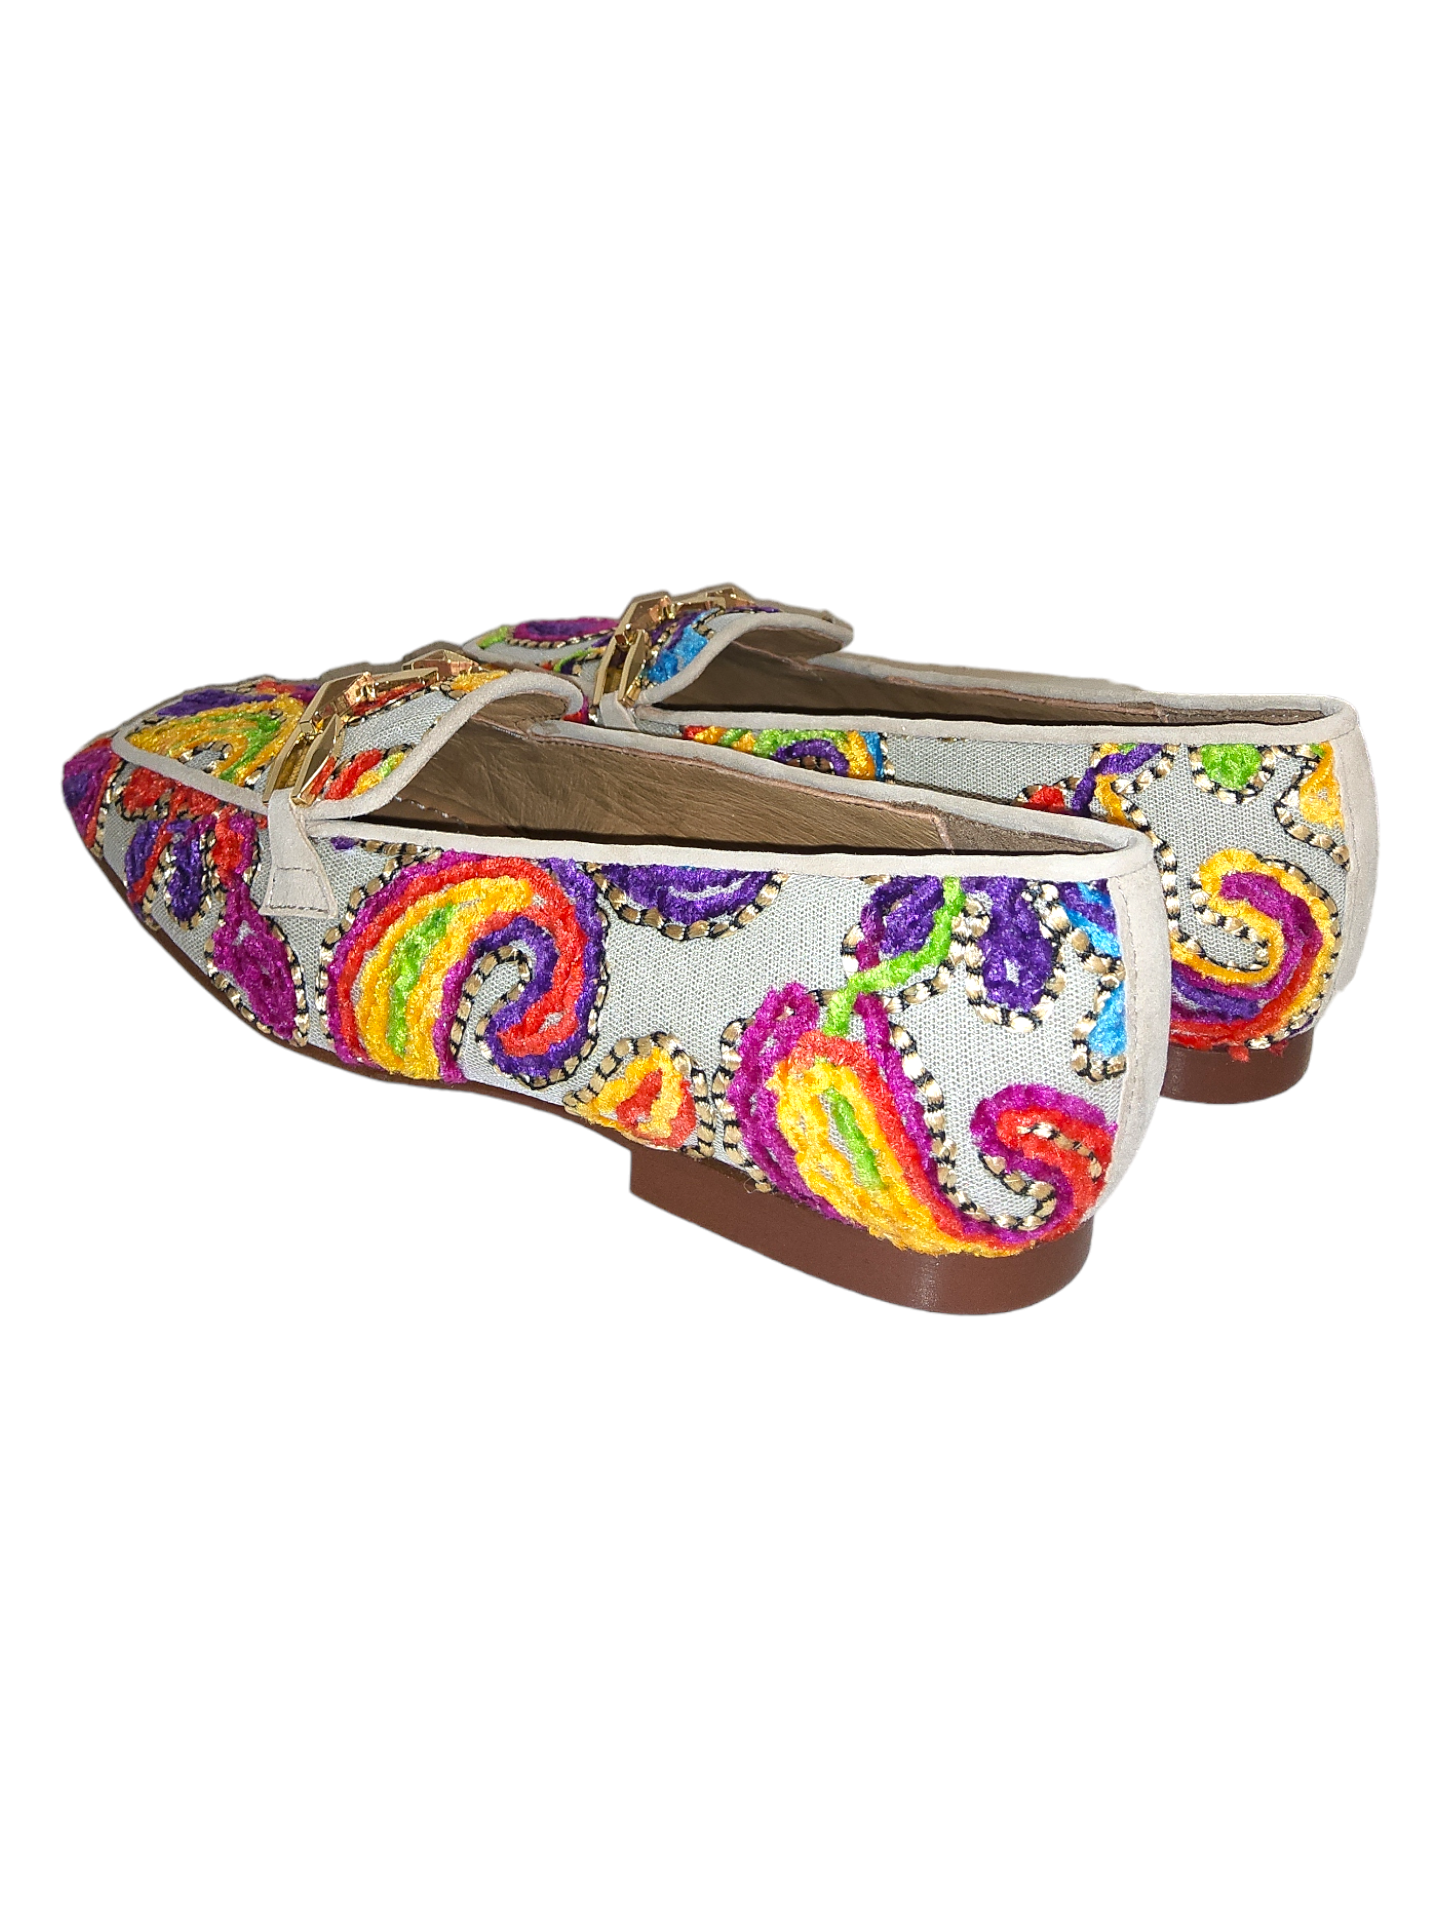 Multicoloured leather loafers